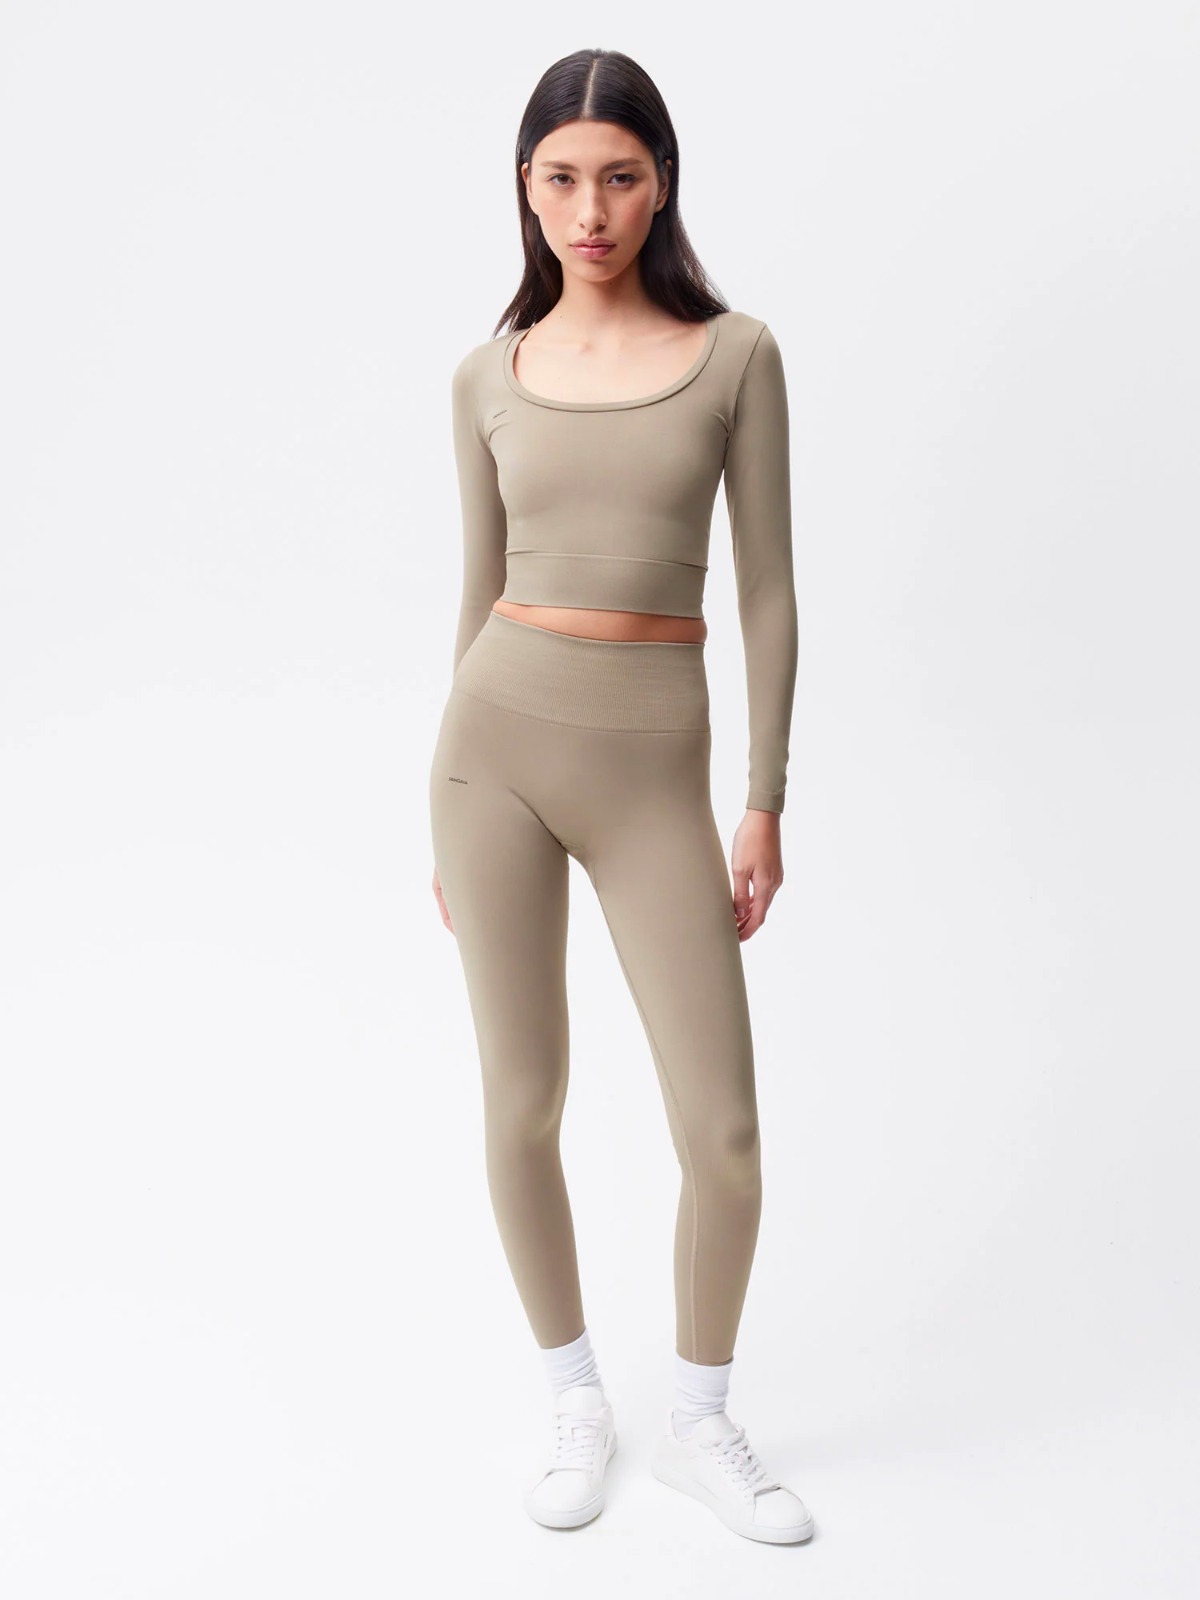 Women’s activewear leggings in taupe. © Hyosung